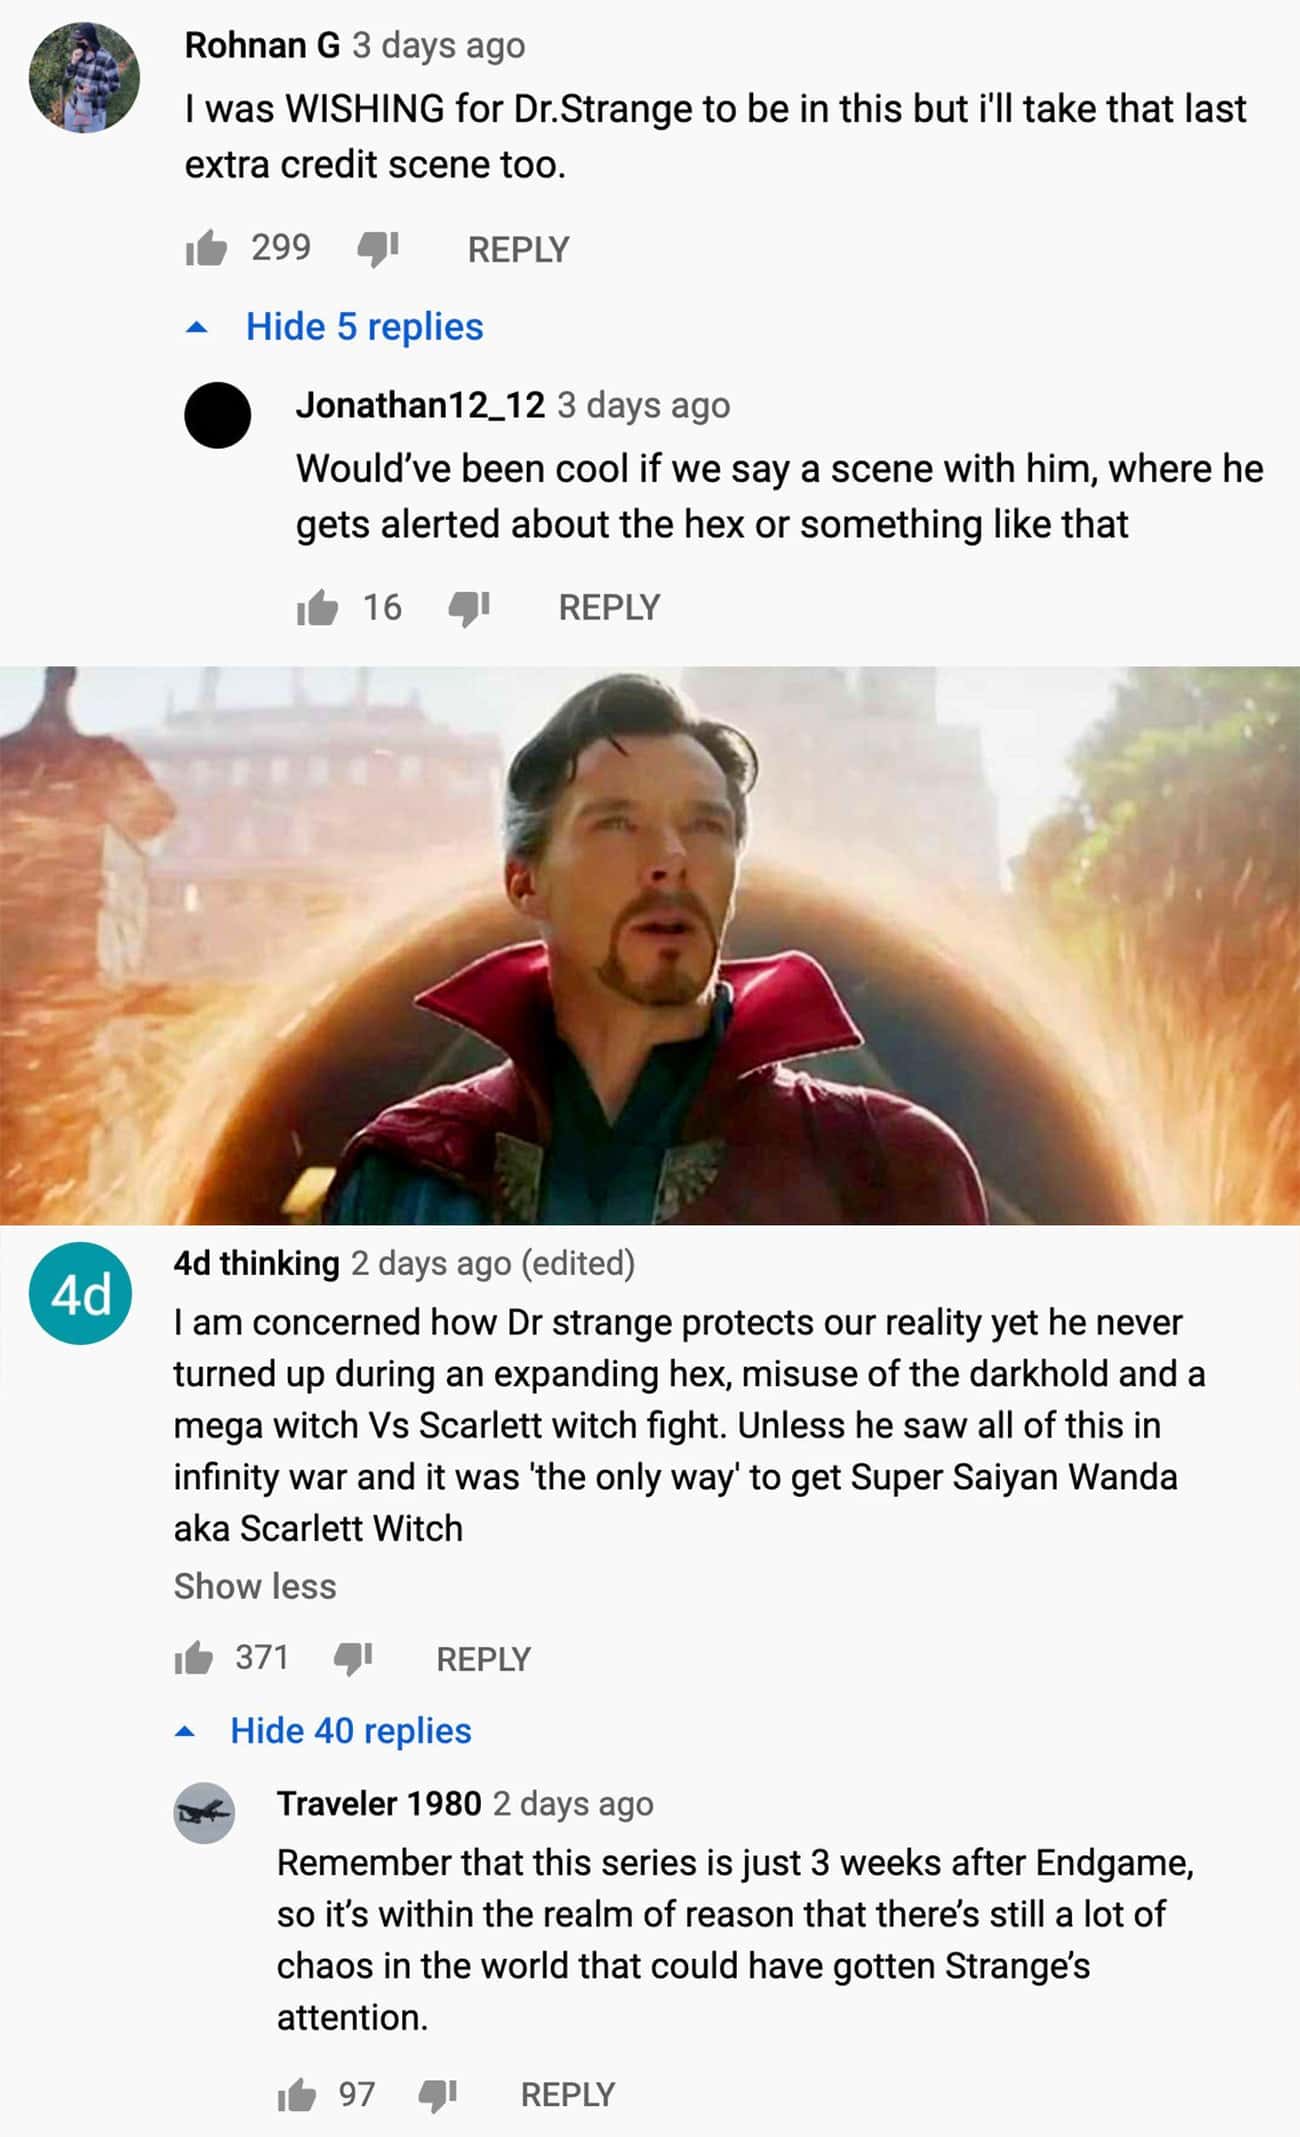 What Will Doctor Strange Have To Say About All This?